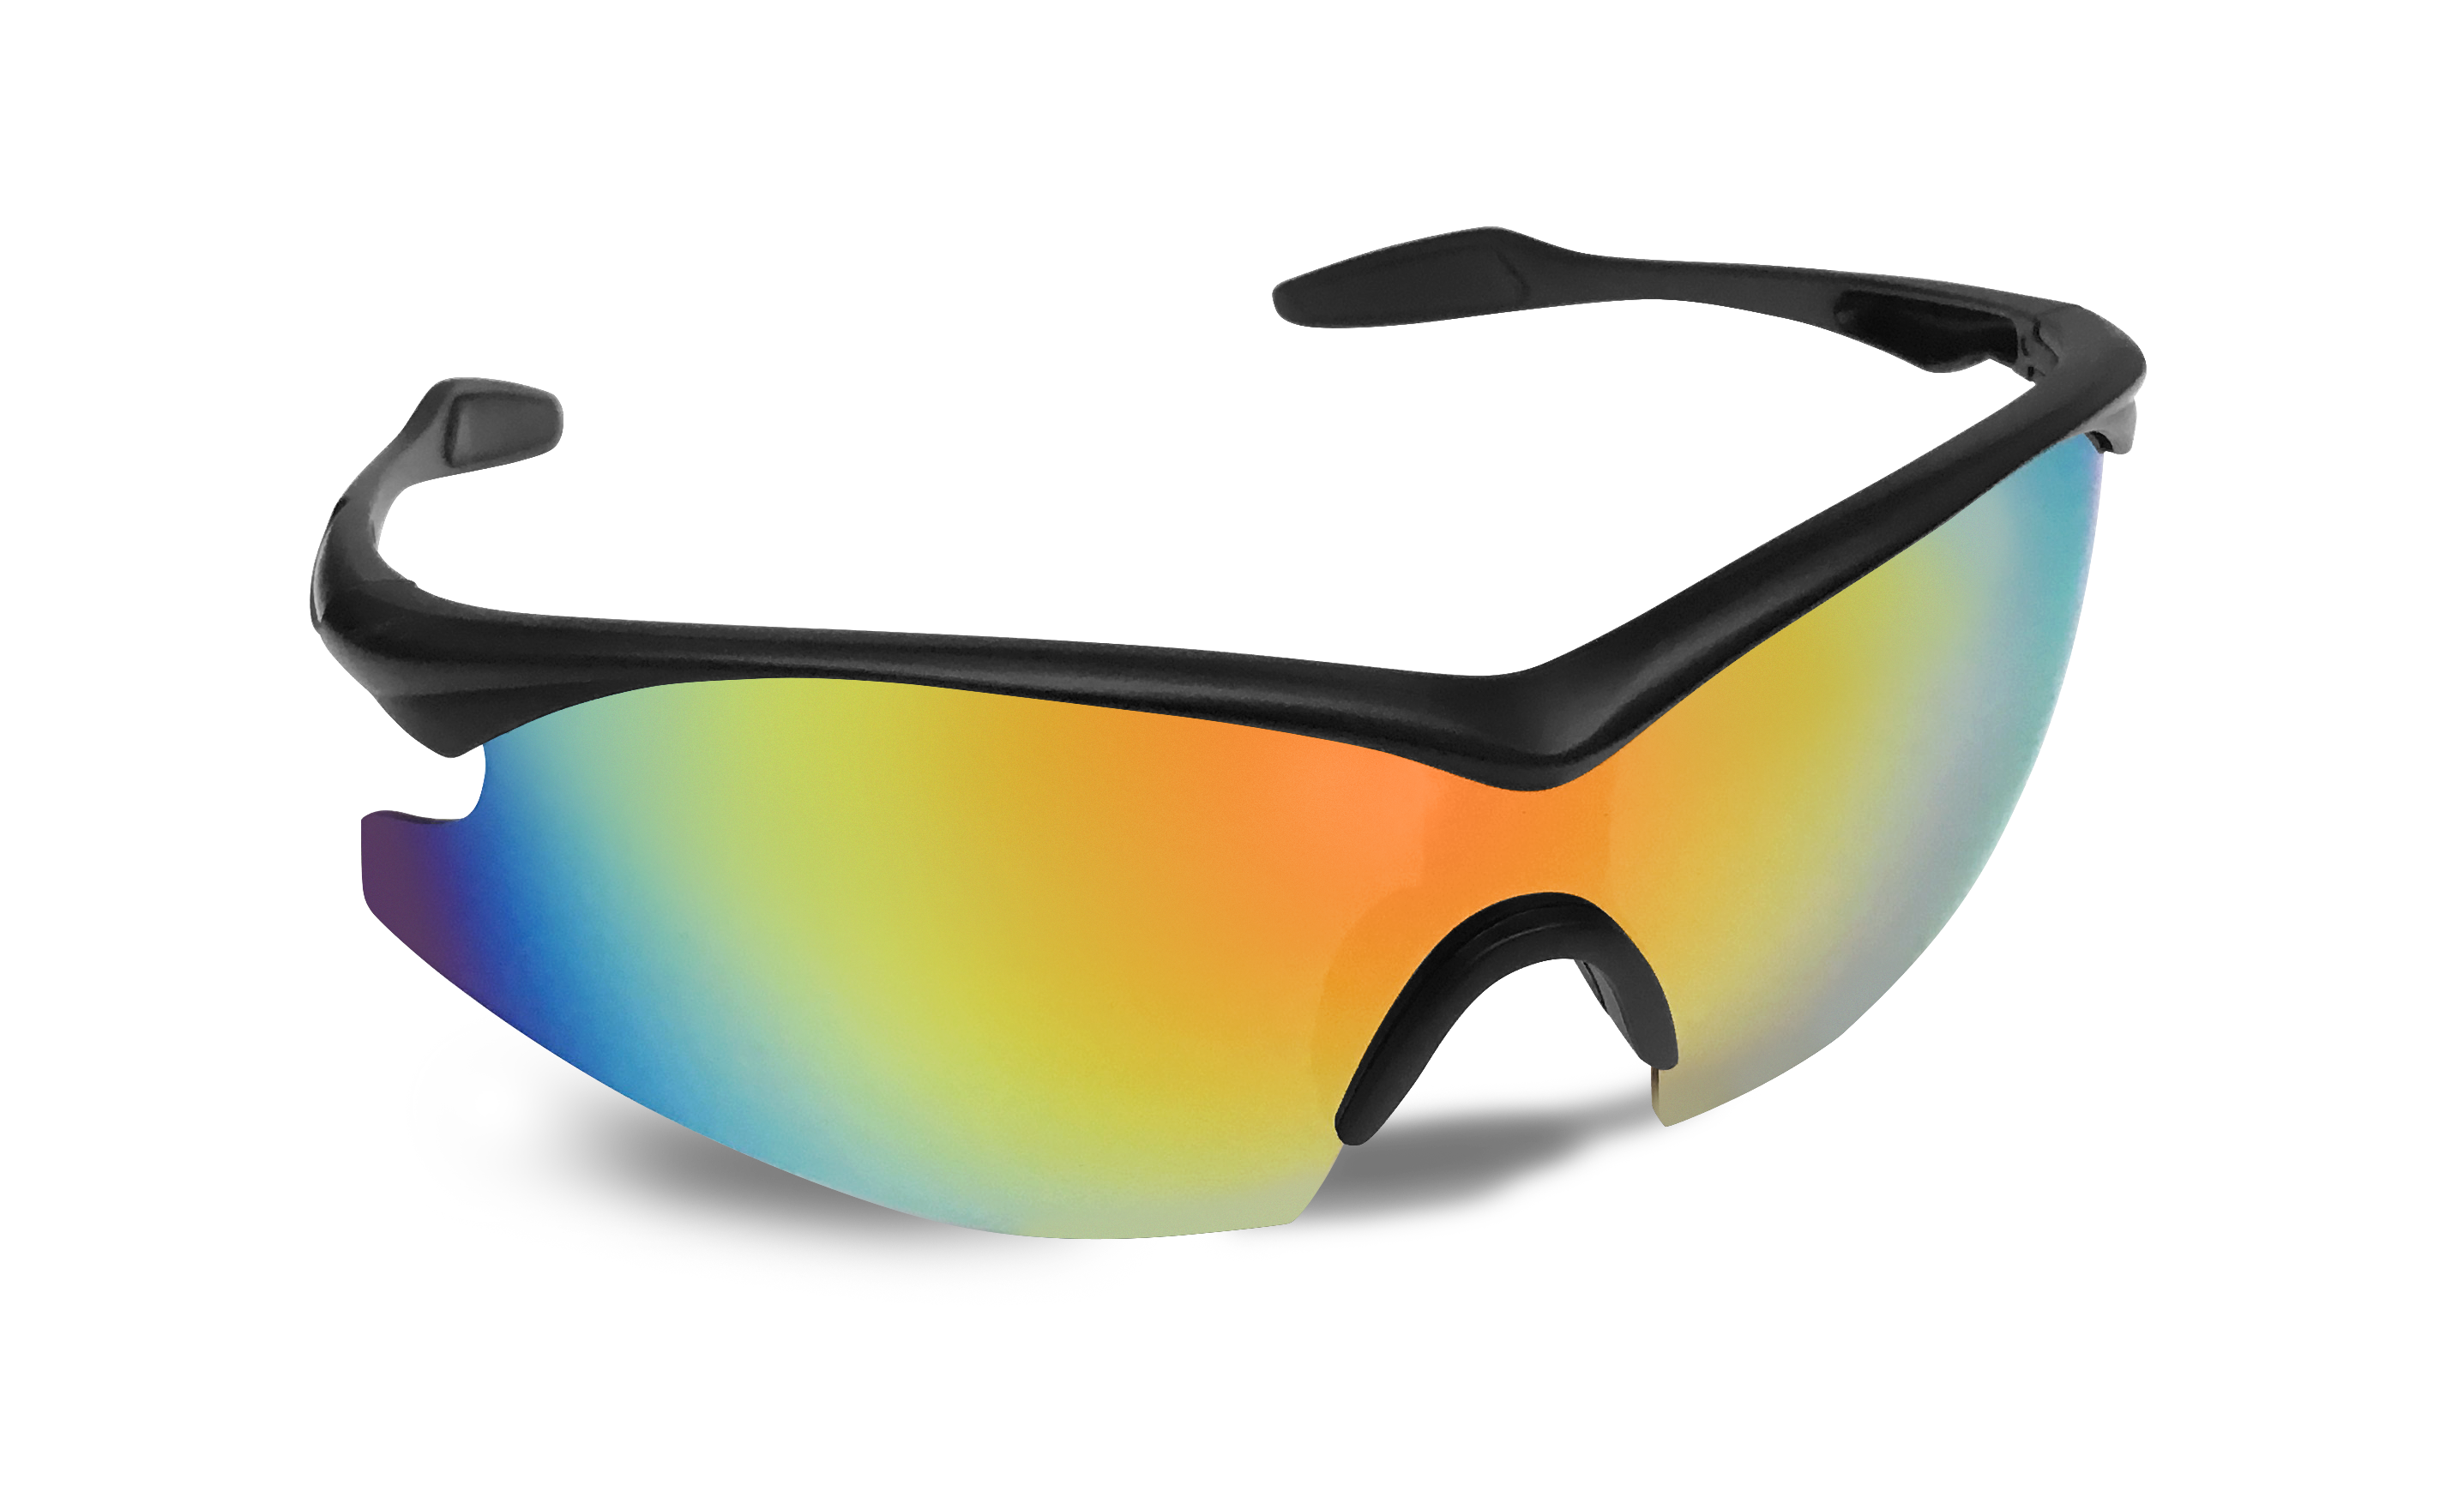 Polarized Rear View Sunglasses Cycling For Men Ideal For Running